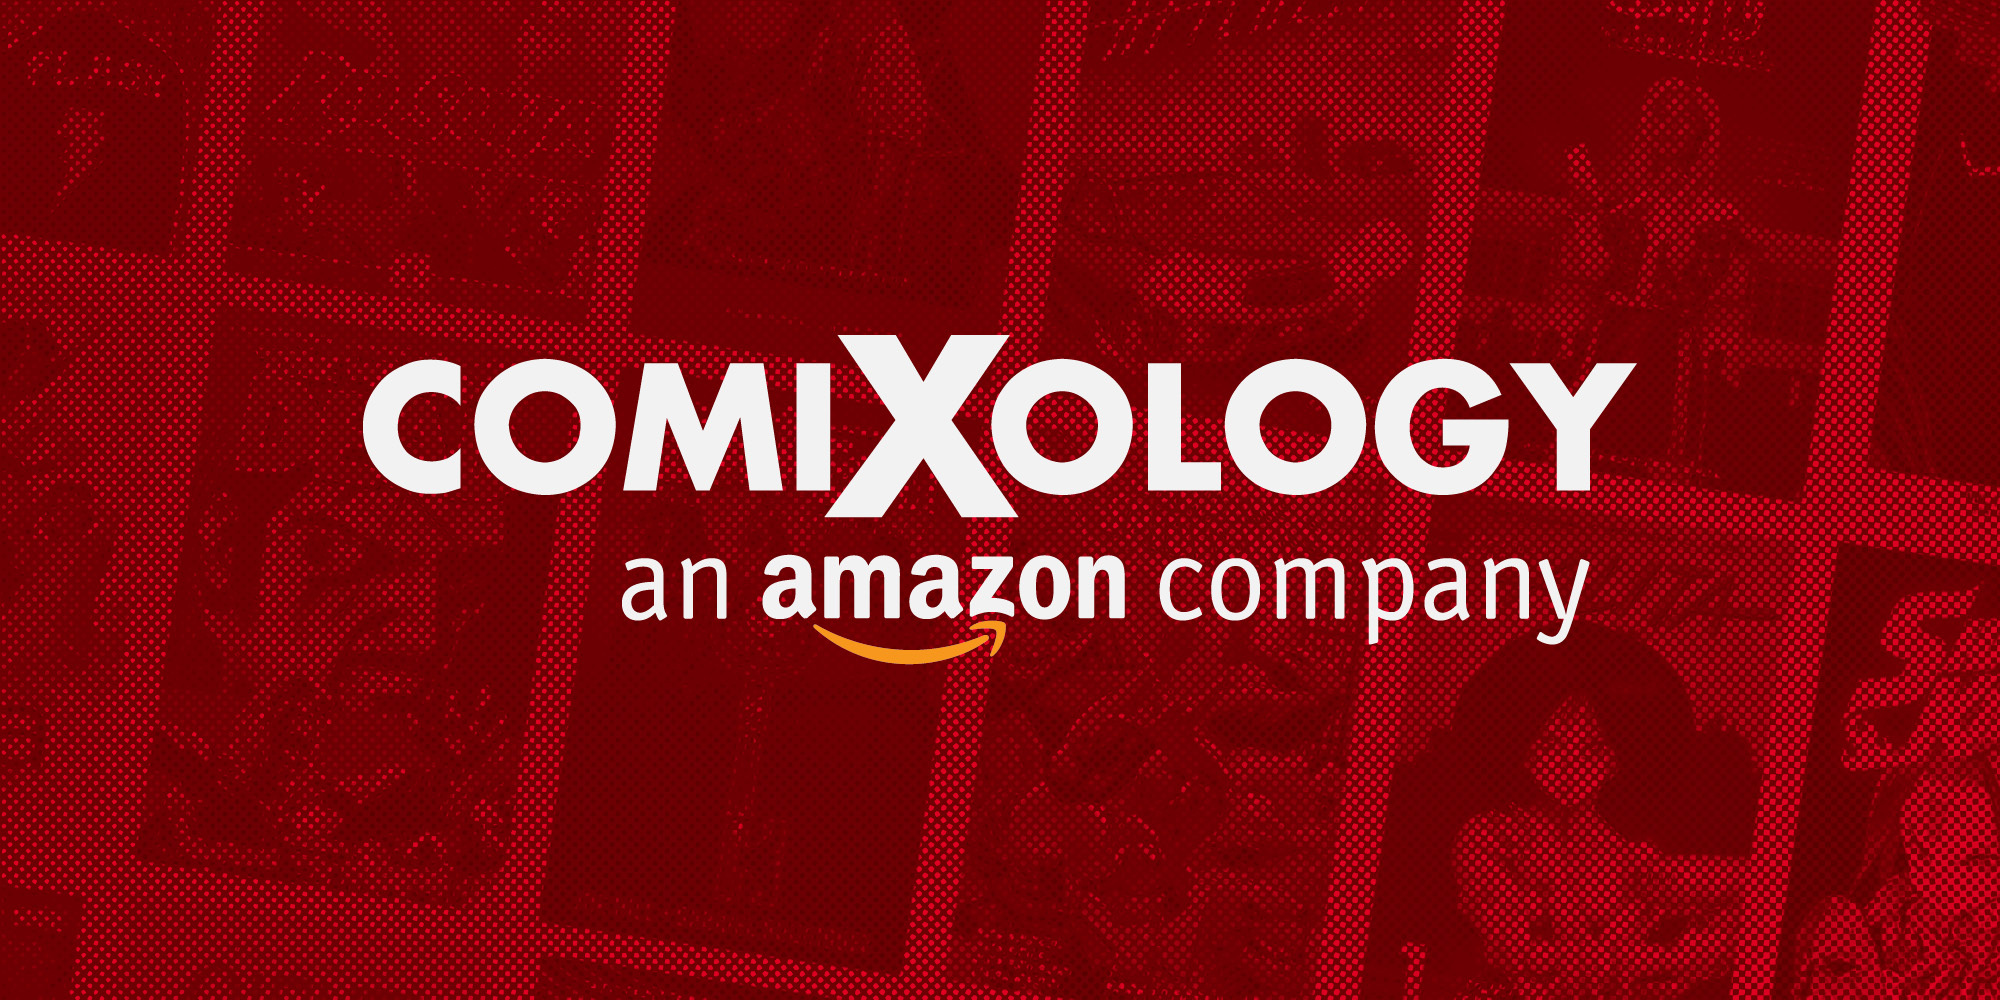 Comixology gets major update, but users don't seem to like it - 9to5Mac